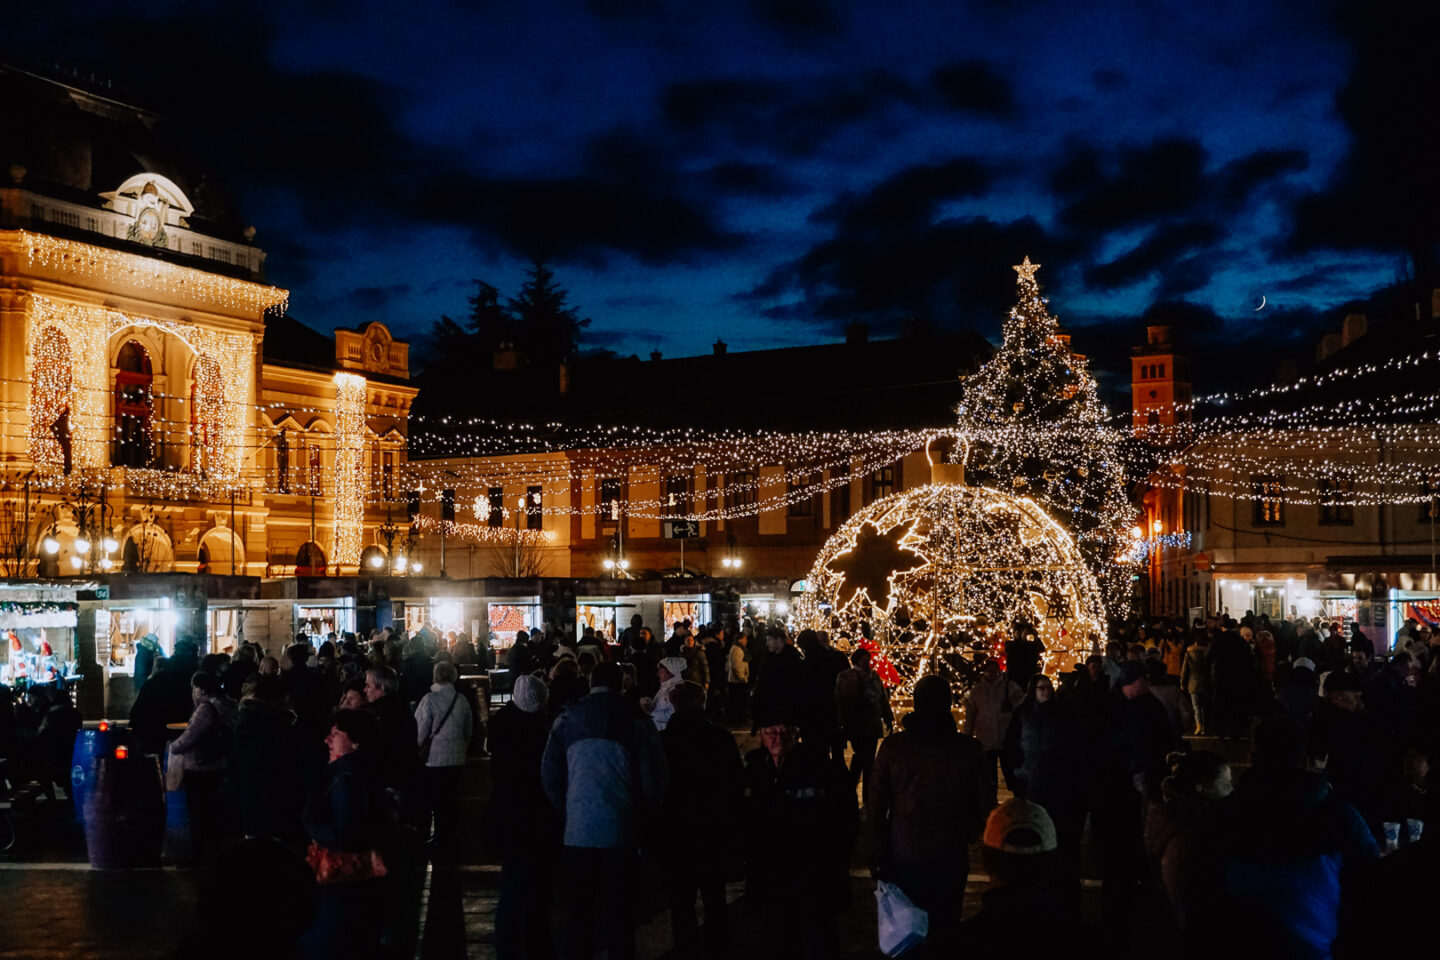 A Christmas tree and lights at the Eger Christmas Market lit up the winter sky in Hungary